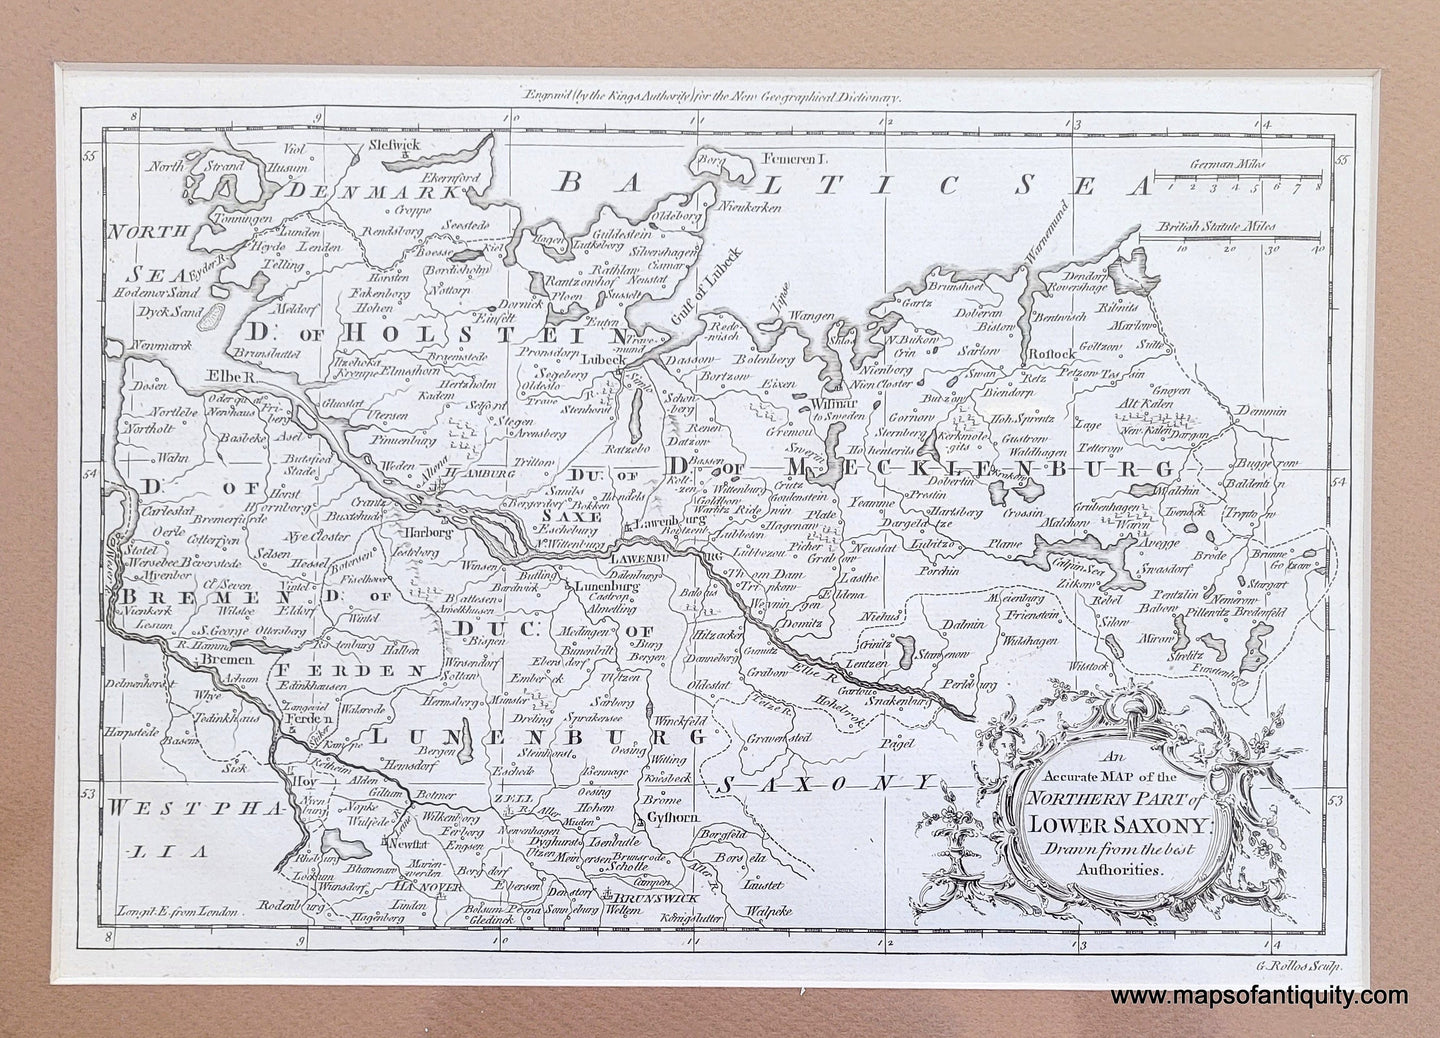 Genuine-Antique-Map-An-Accurate-Map-of-the-Northern-Part-of-Lower-Saxony-Drawn-from-the-best-Authorities-1759-Rollos-Maps-Of-Antiquity